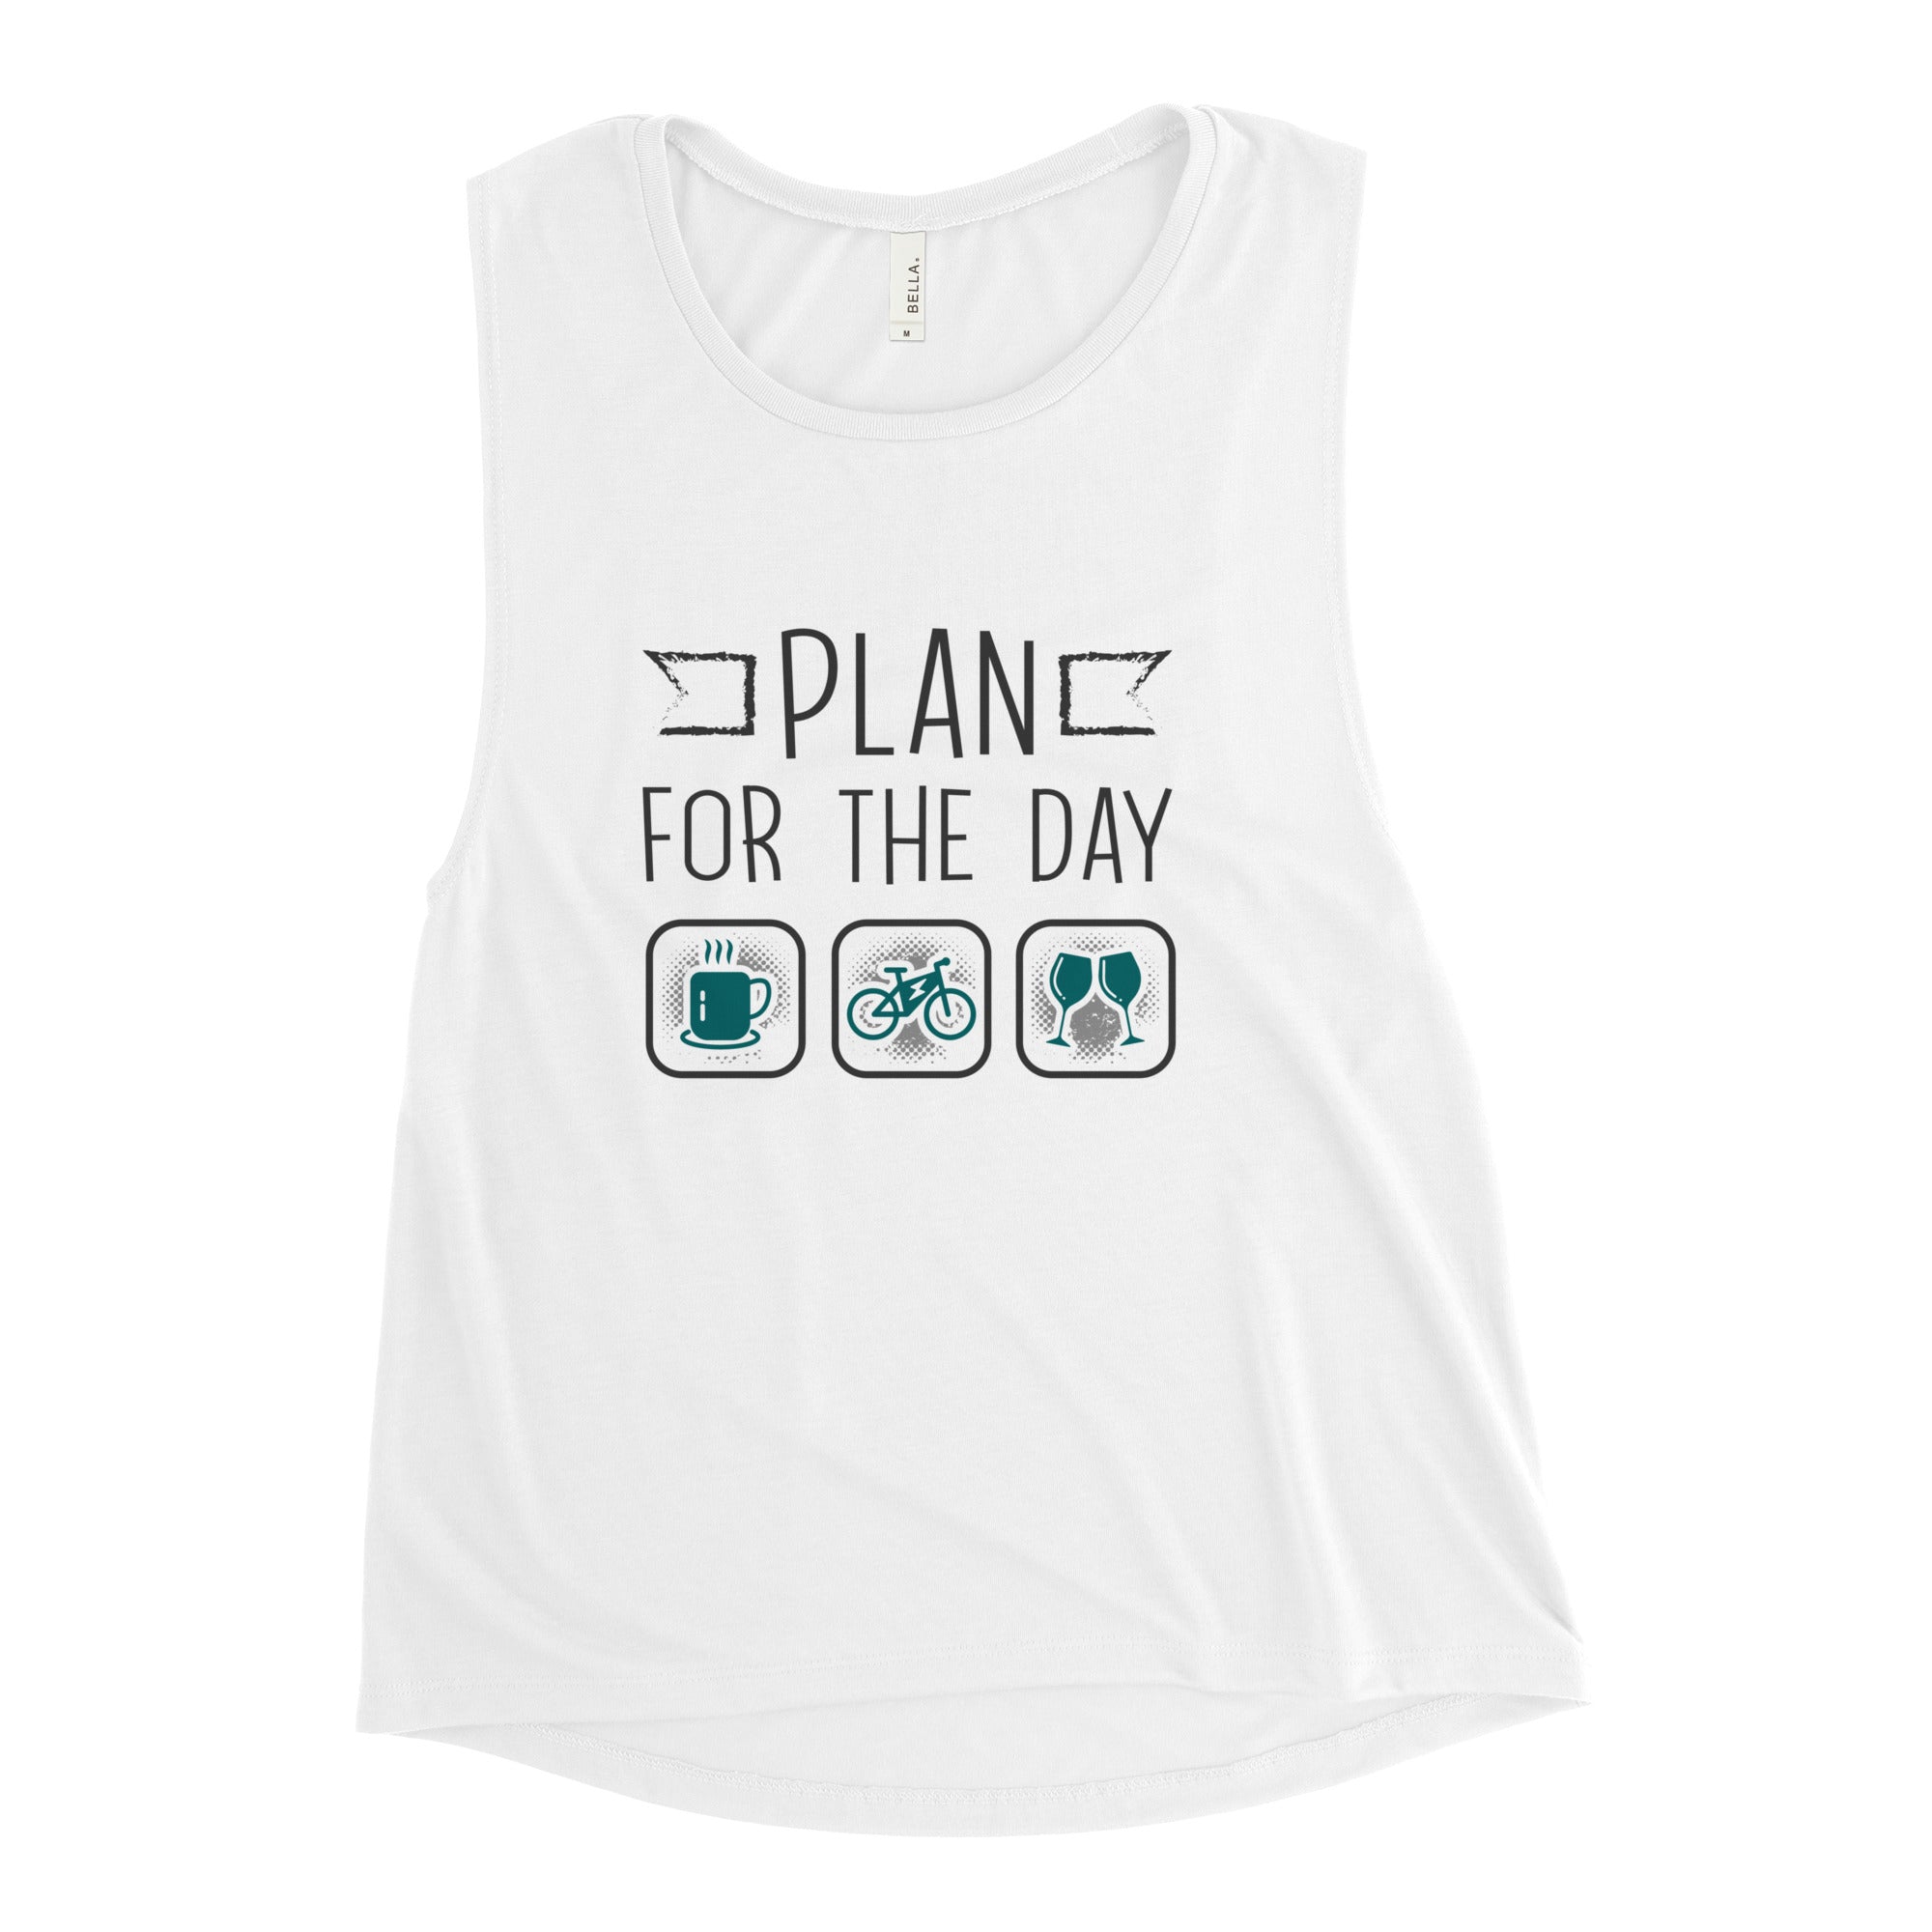 Plan for the Day "Coffee, E-bike, Wine" Bella + Canvas 8803 Women's Muscle Tank Top White